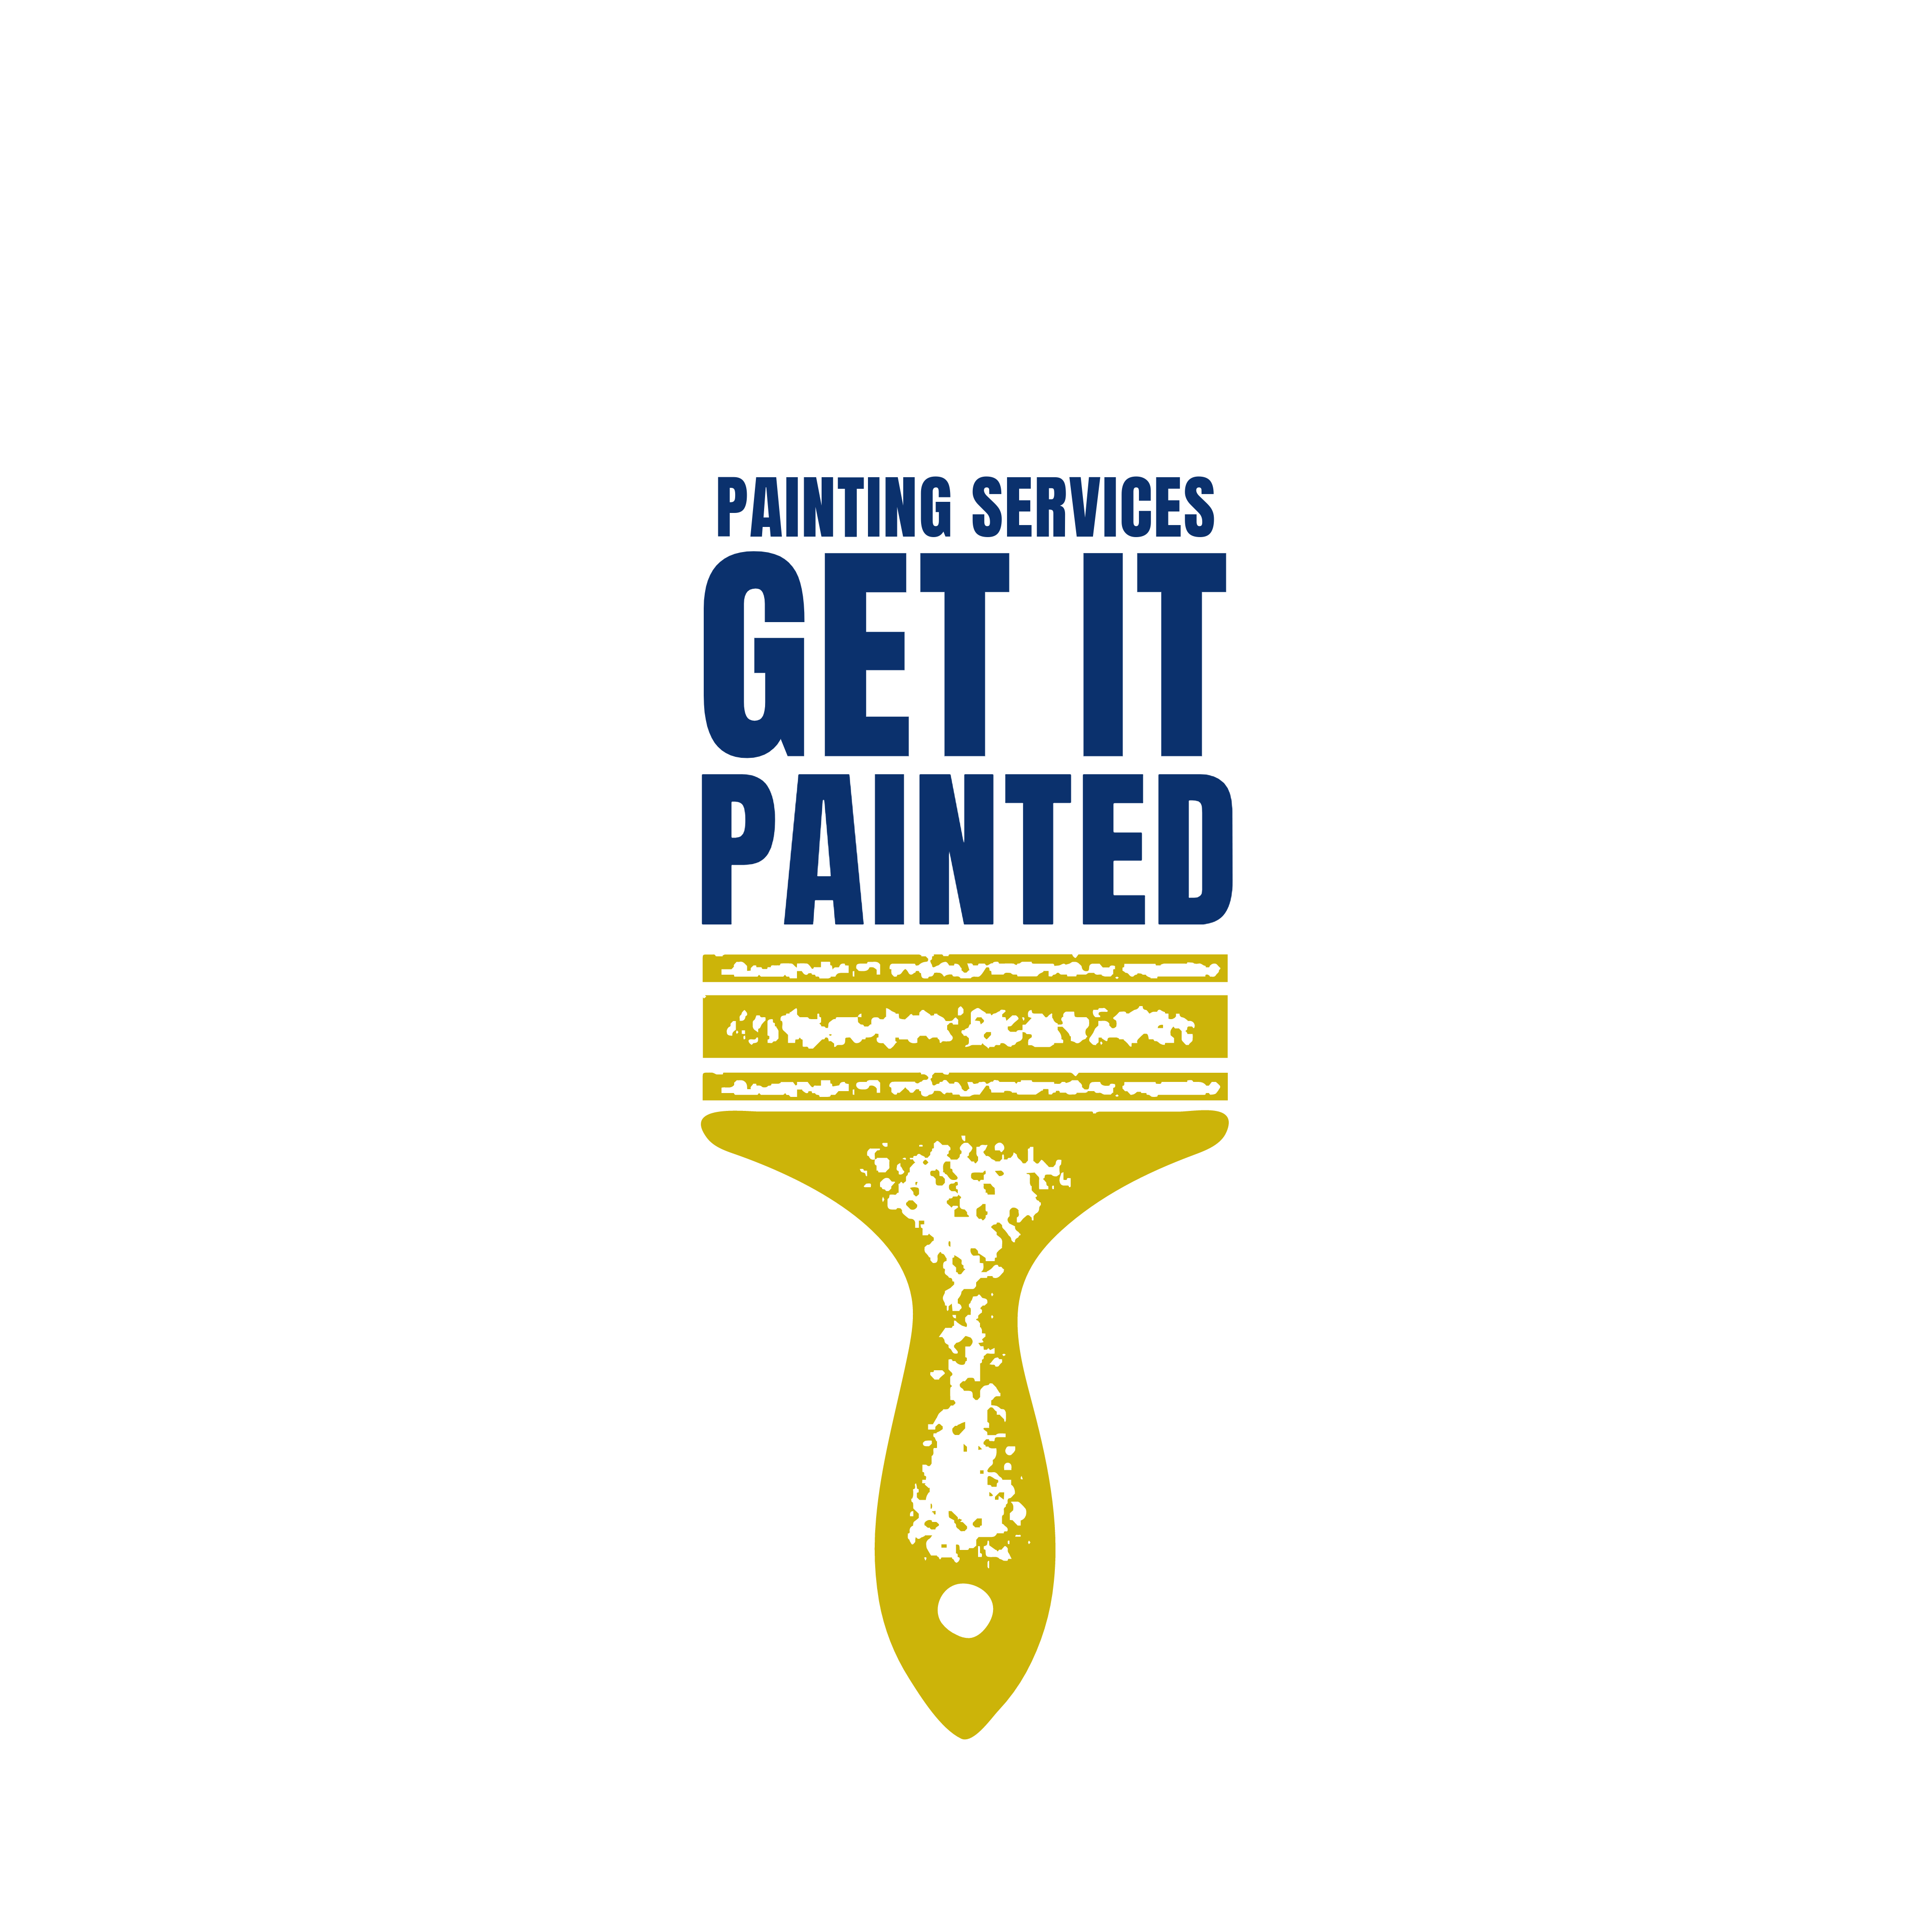 Get It Painted Painting Services